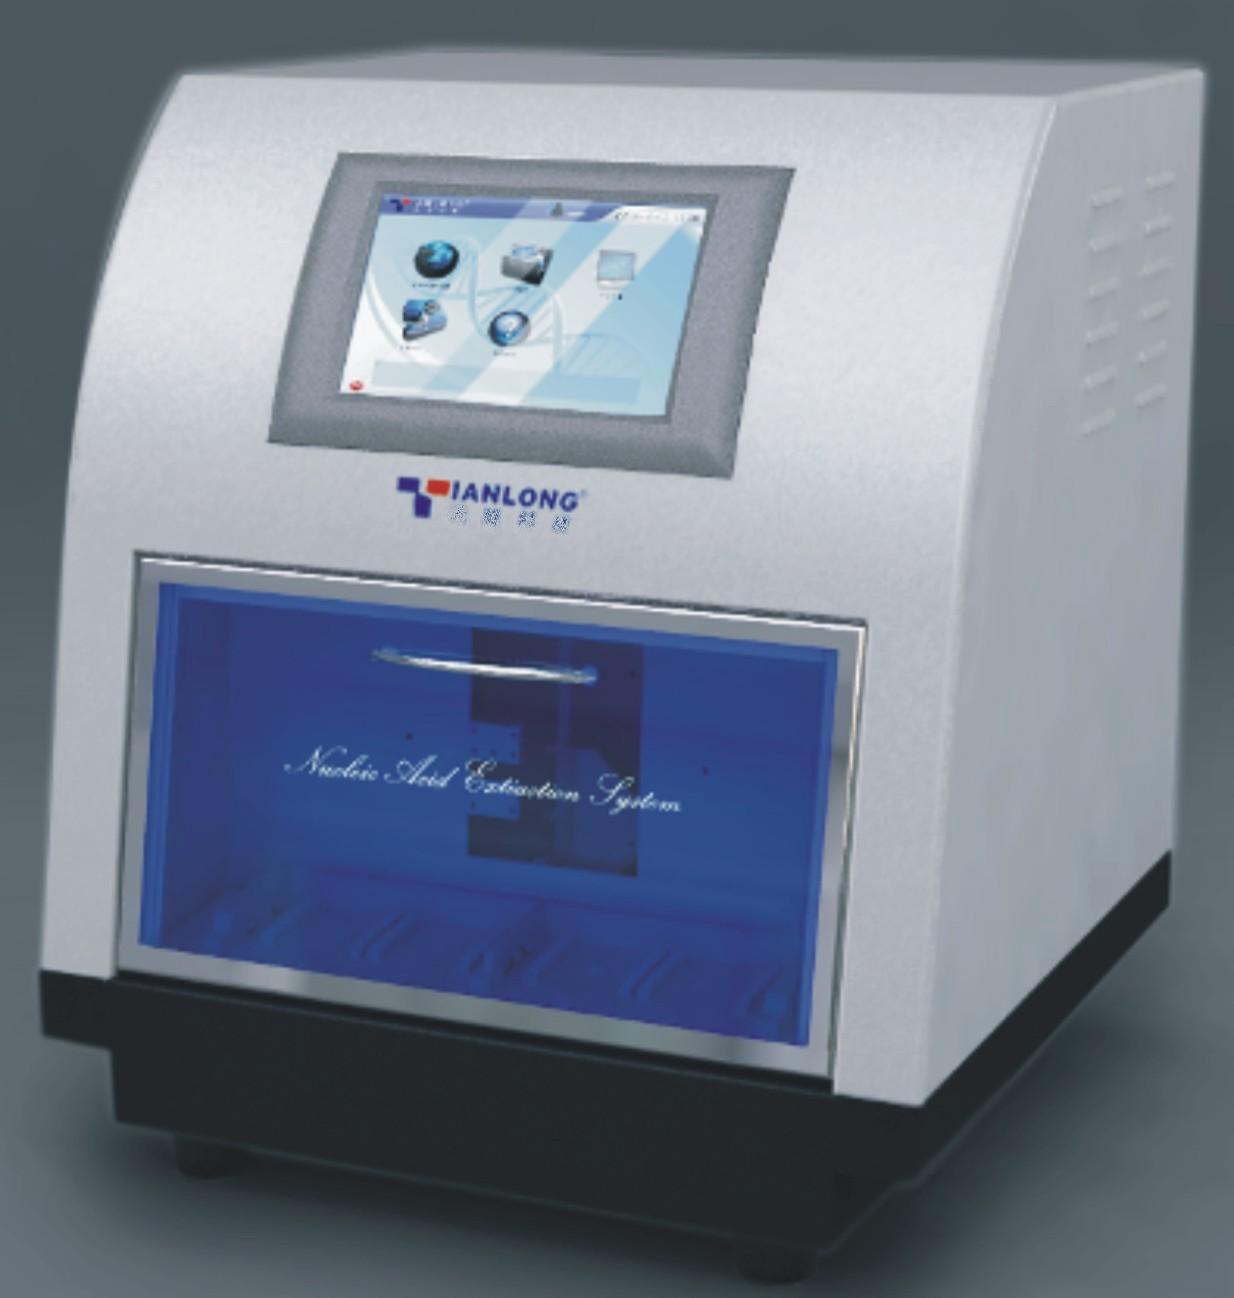 NP968型 核酸提取仪（Nucleic Acid Extraction System）